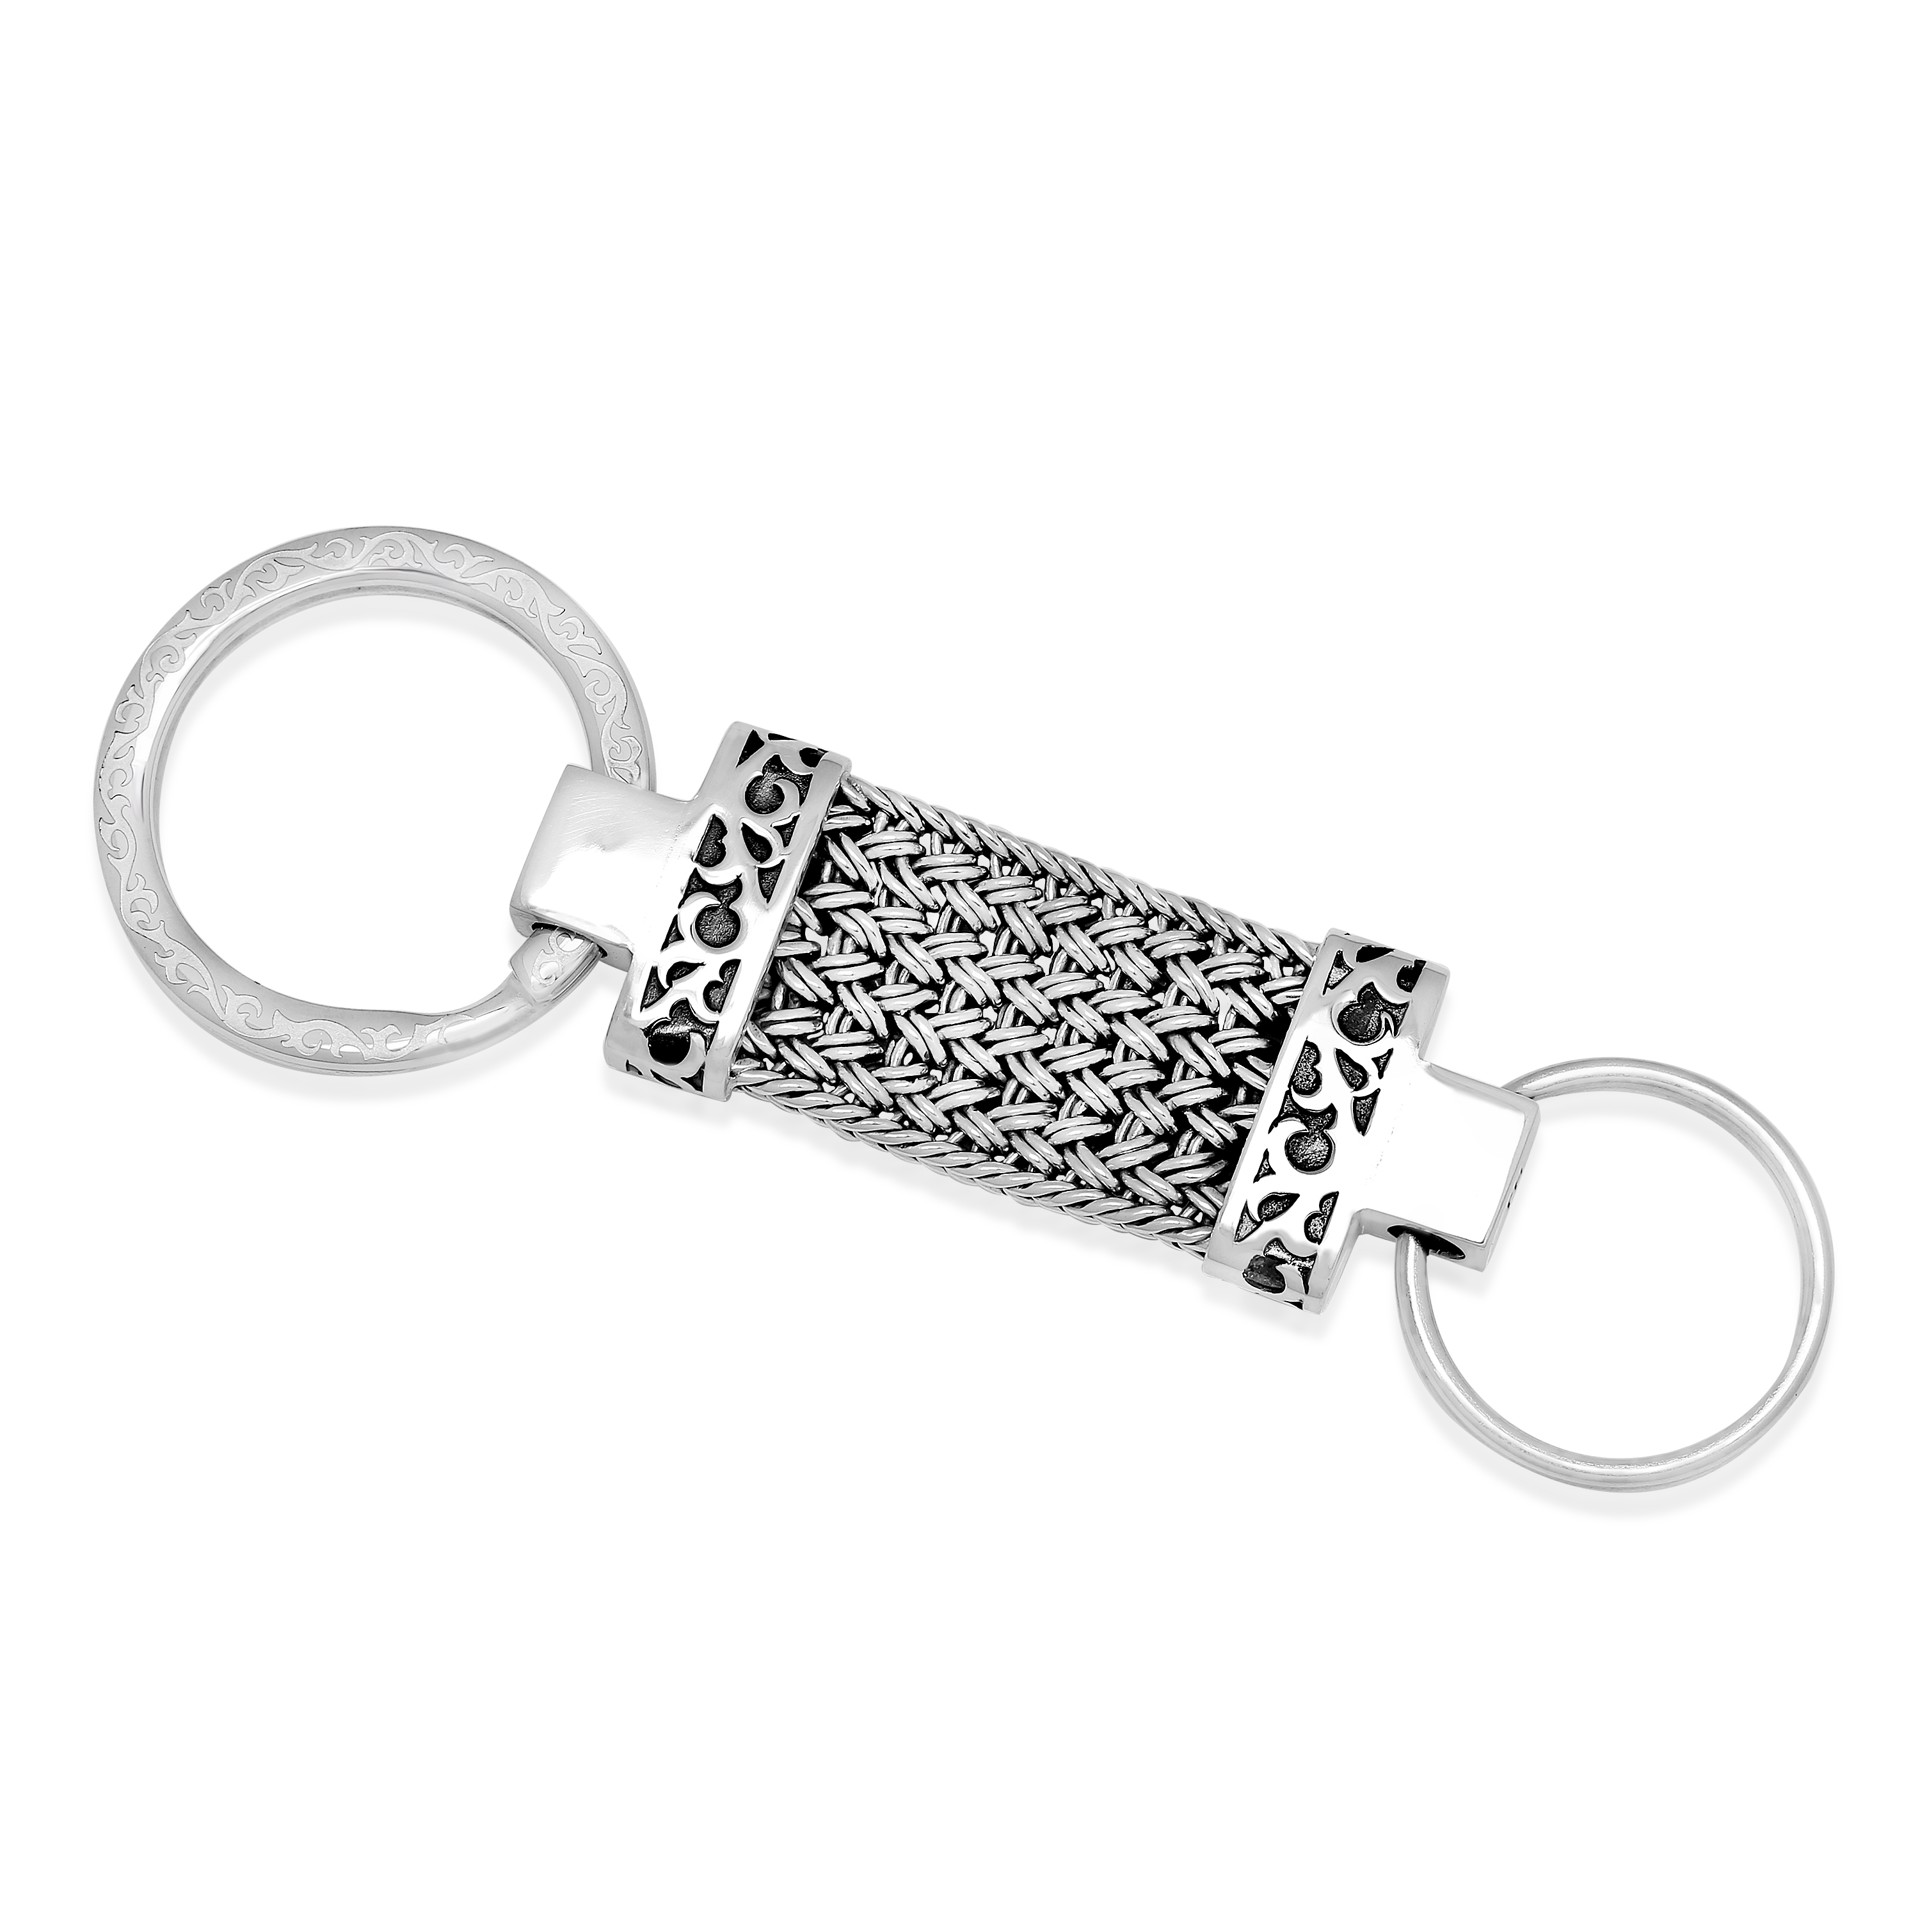 9191 Sterling Silver Woven Keychain by Lois Hill